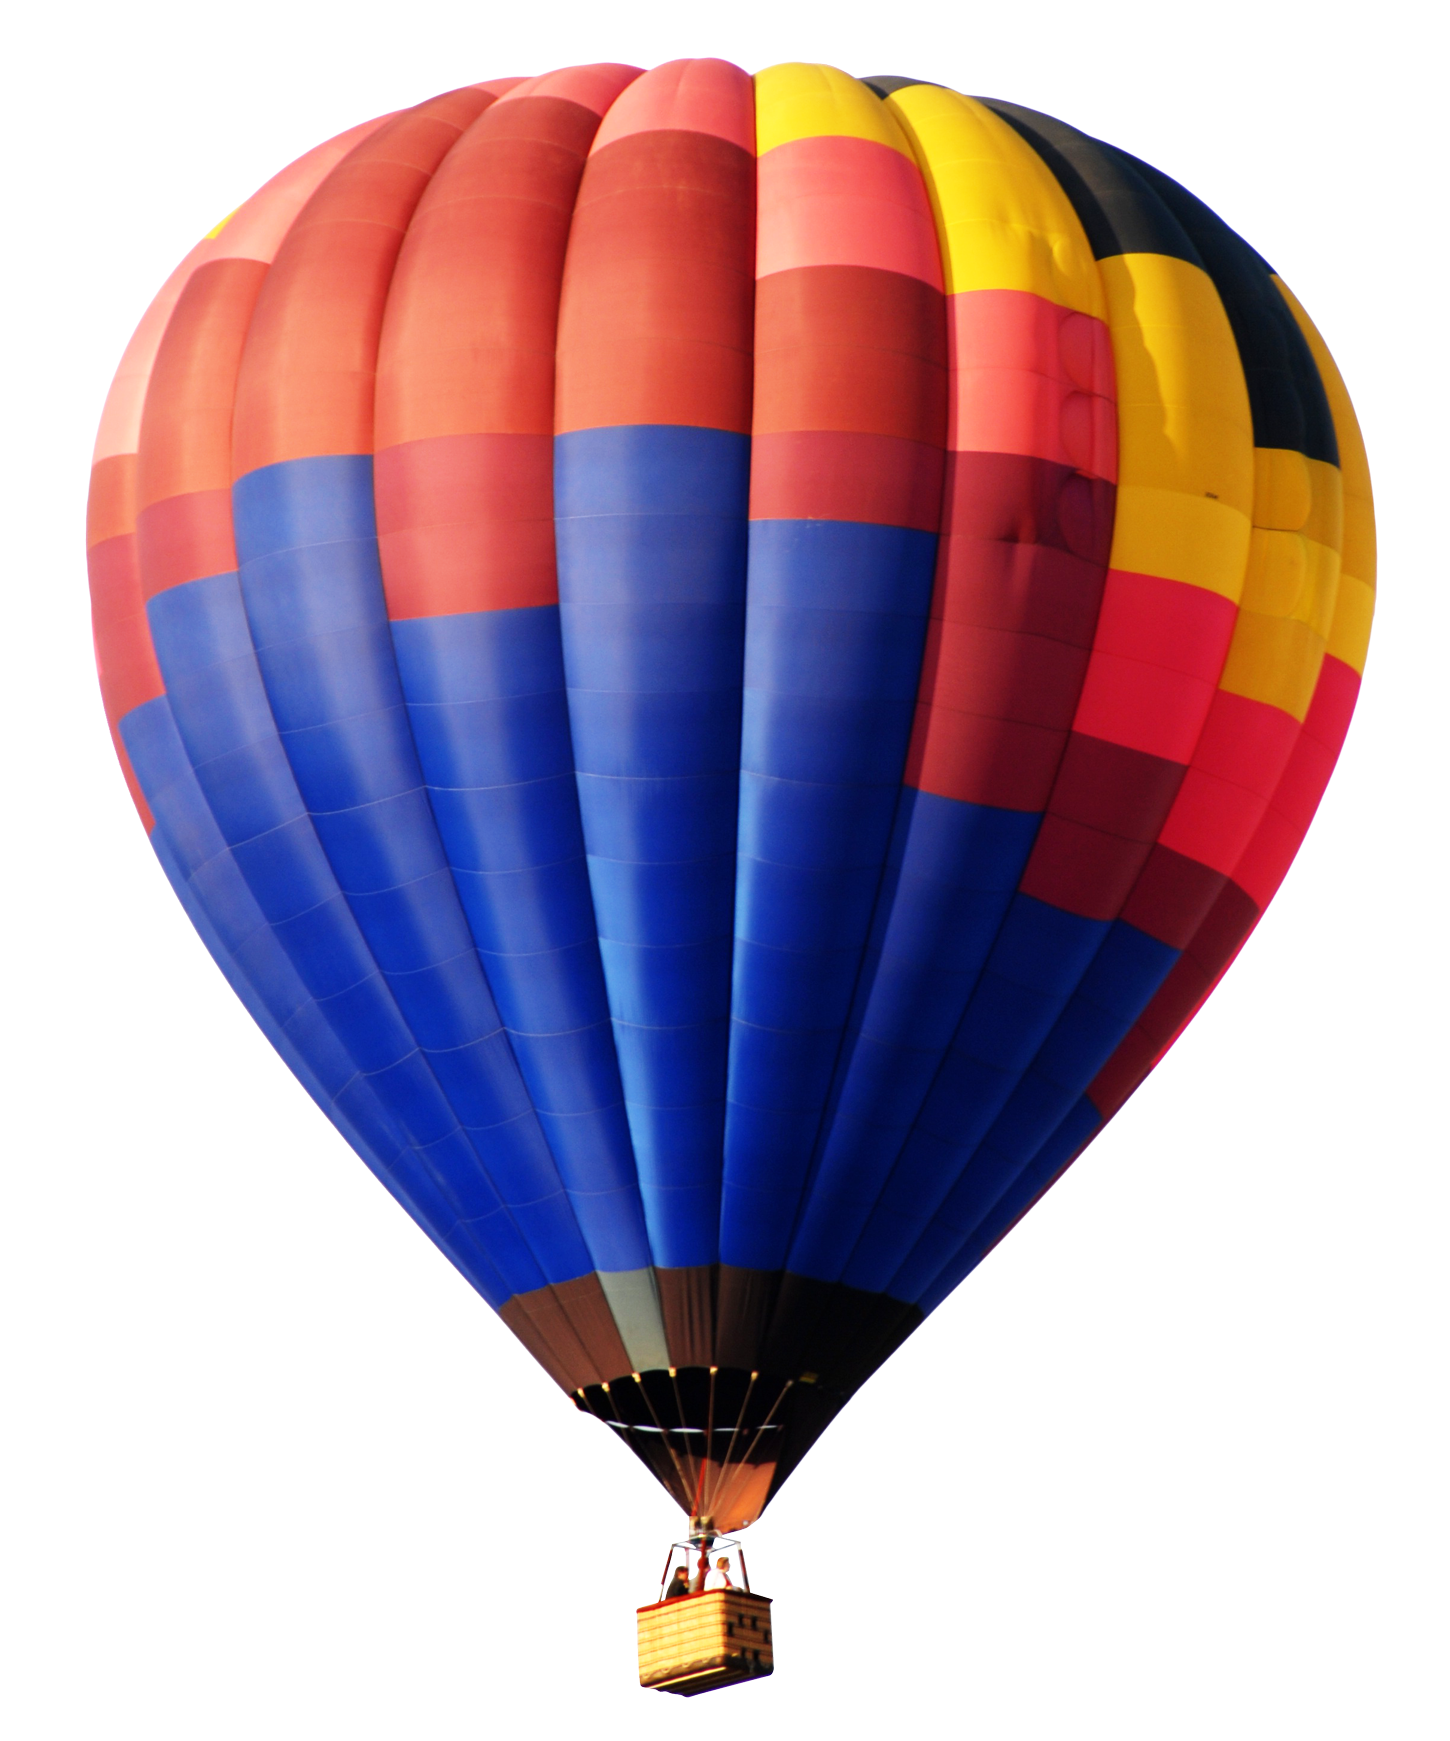 Balloon Png Transparent Background